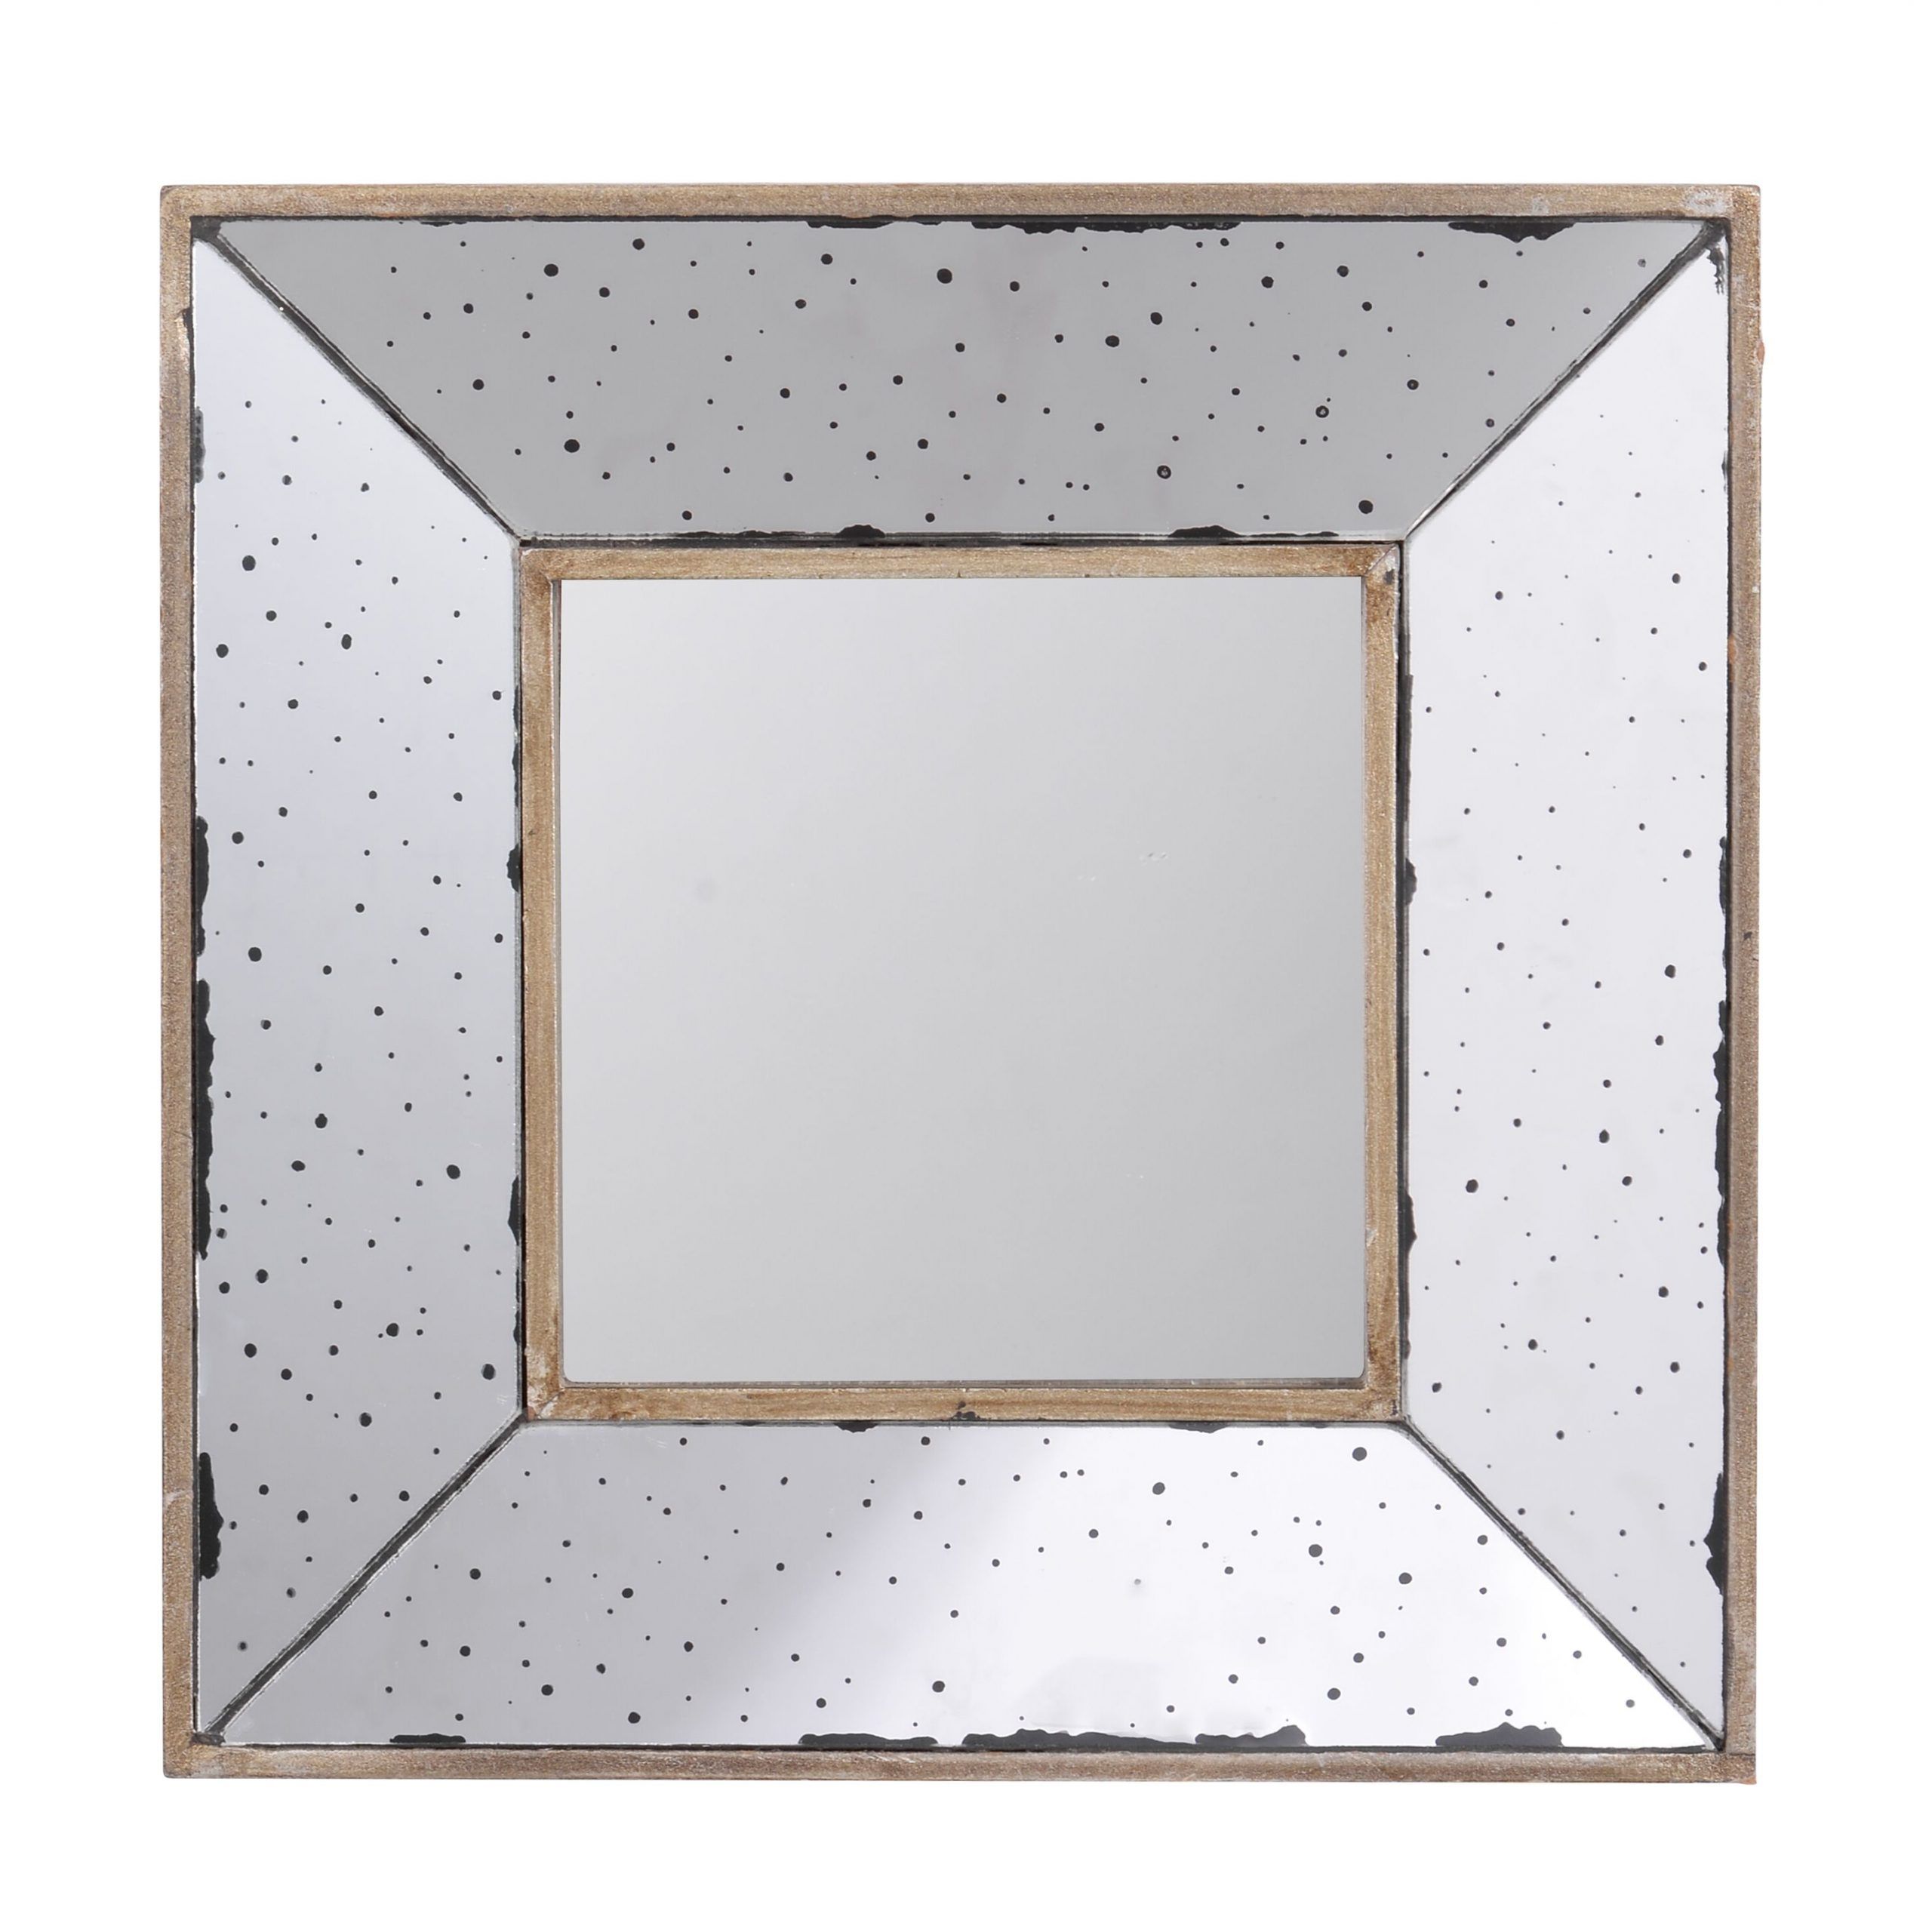 12" Polished Silver Finish Framed Small Square Wall Mirror – Walmart Within Best And Newest Silver Beaded Square Wall Mirrors (View 14 of 15)